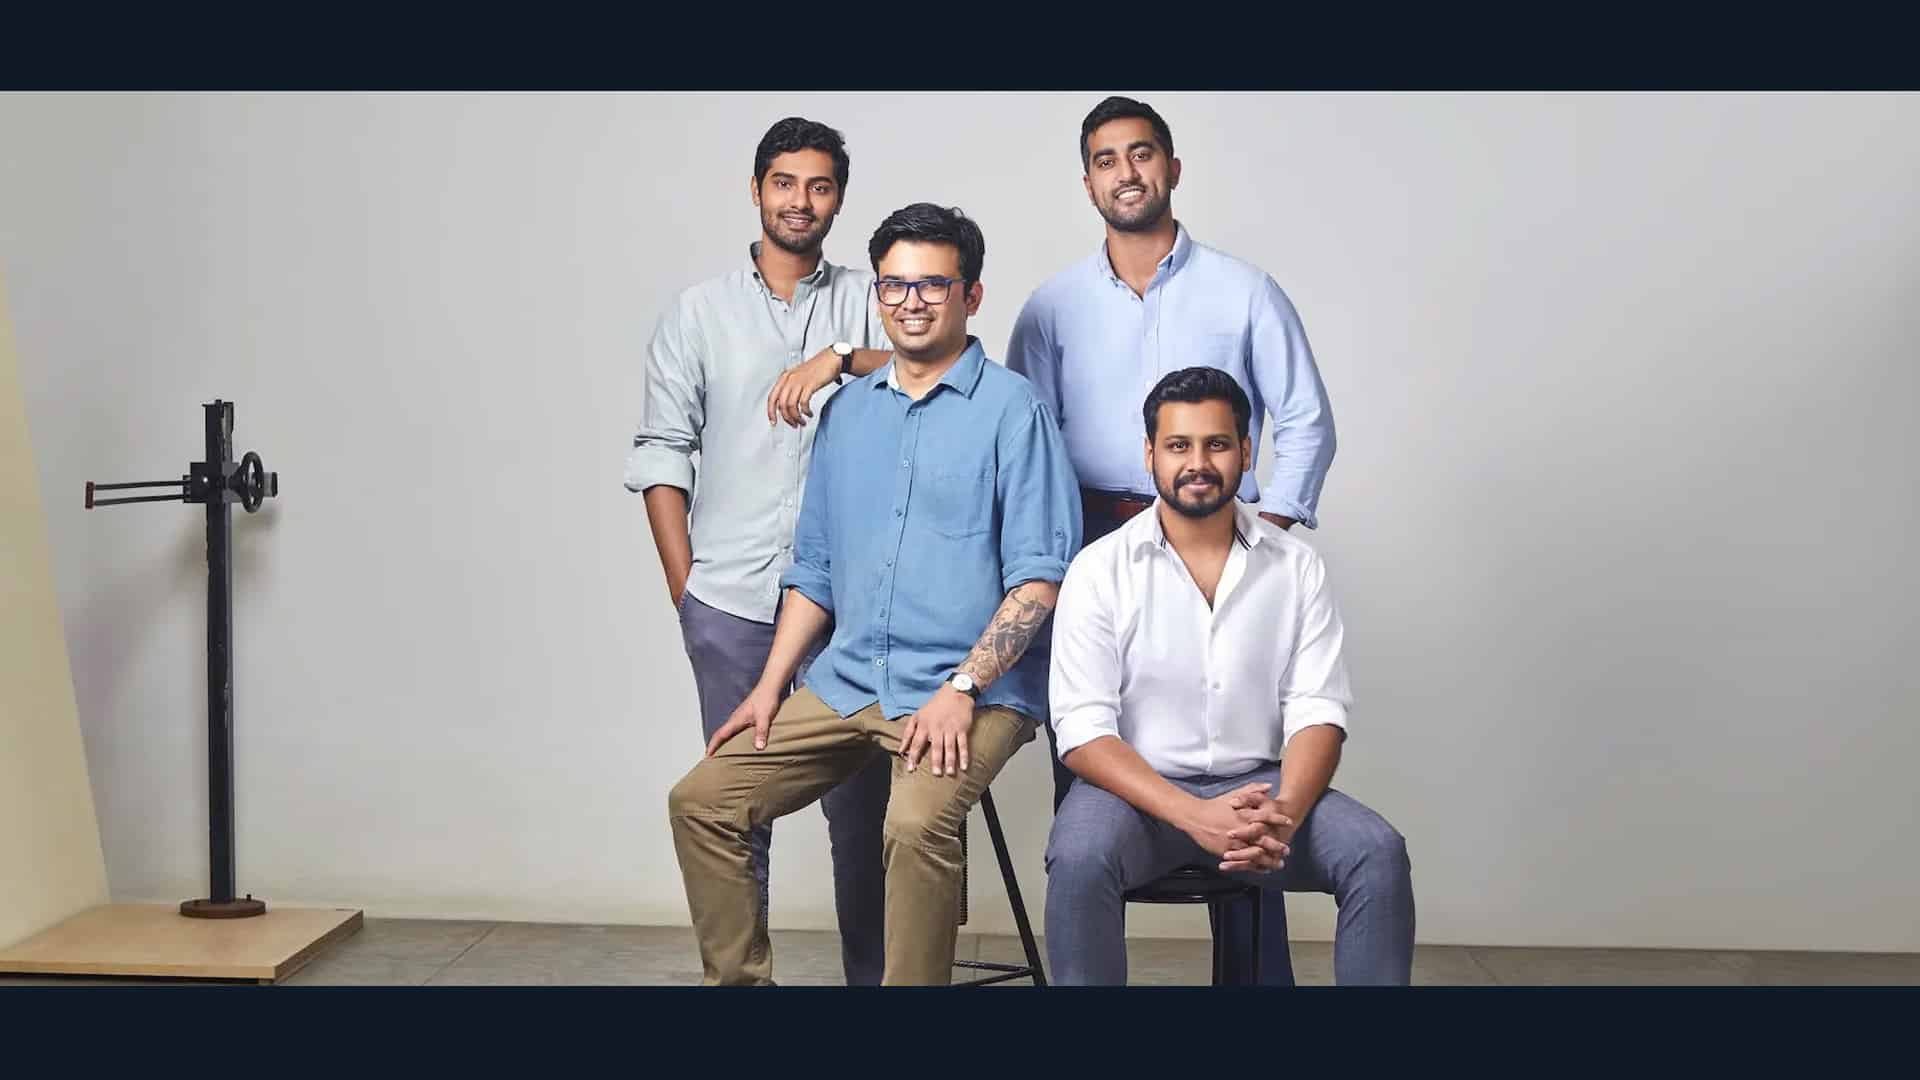 Insurance startup Loop Health raises $12 mn from Elevation, General Catalyst, others